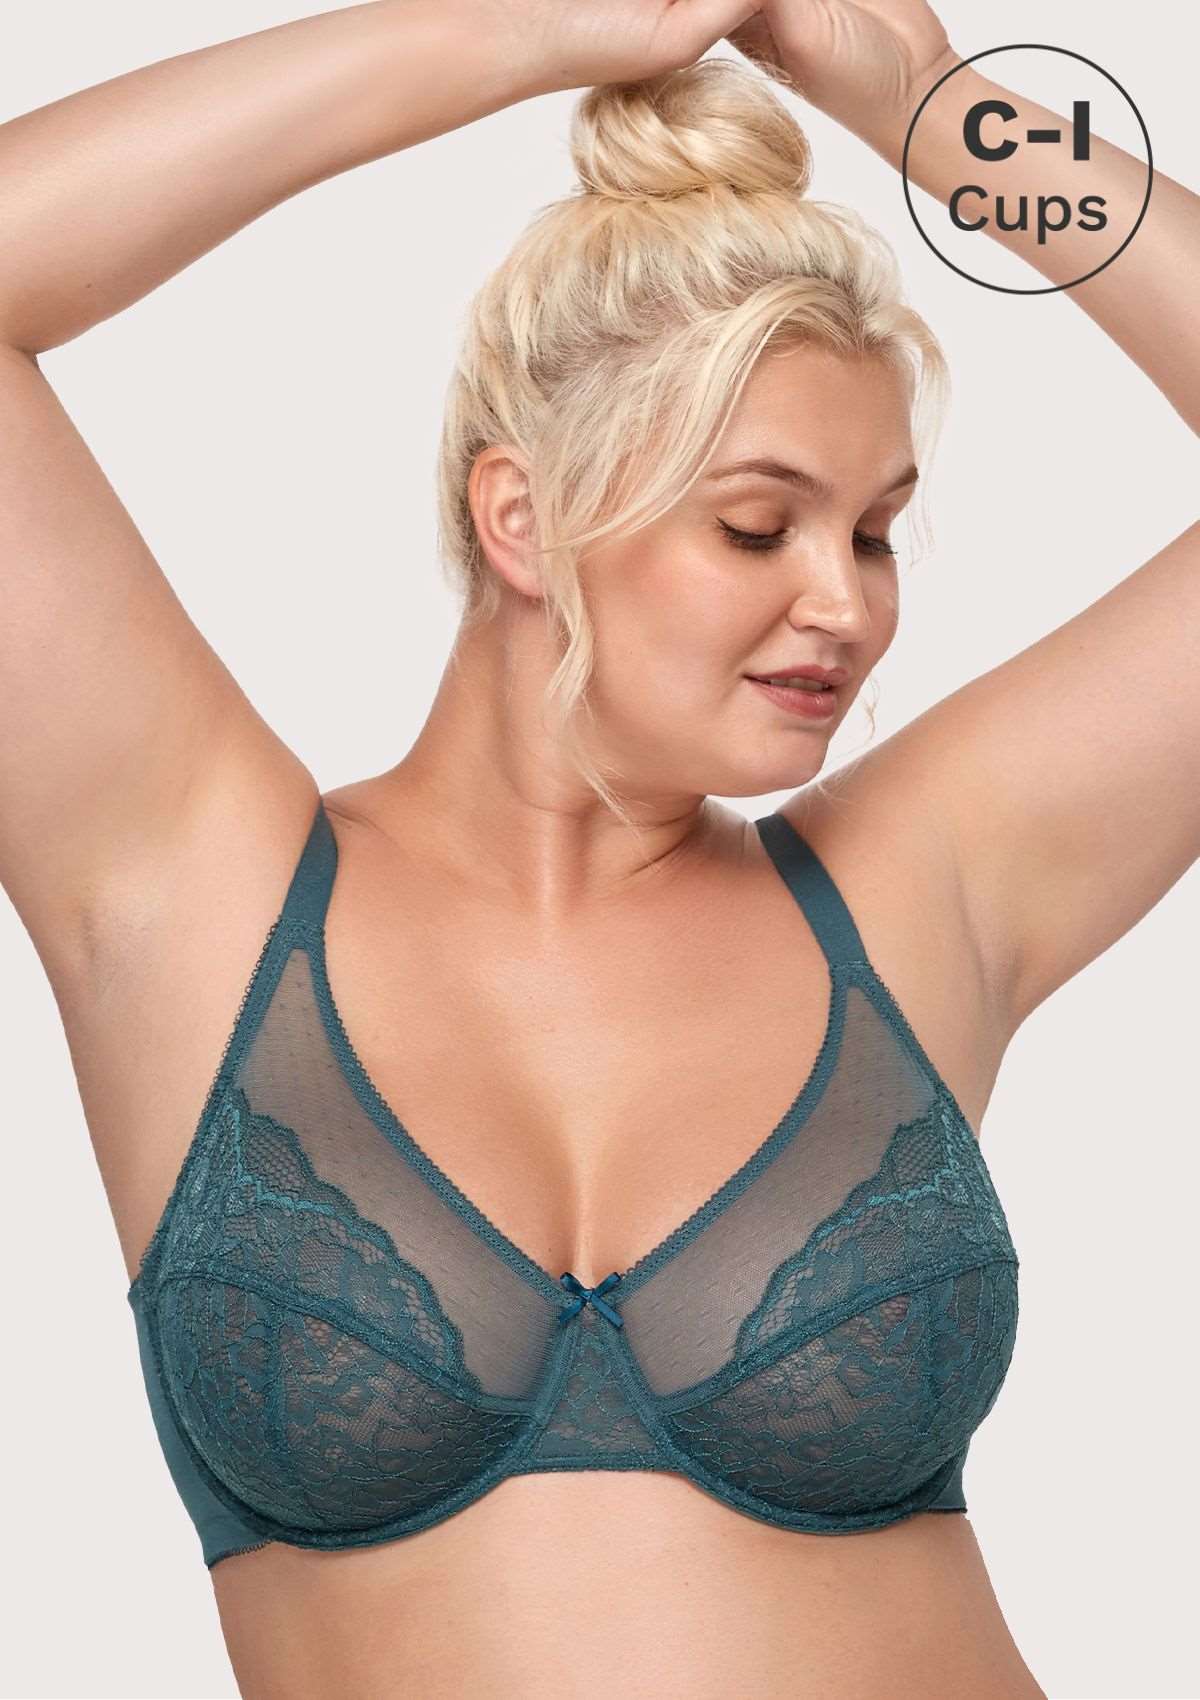 HSIA Enchante Full Coverage Bra: Supportive Bra For Big Busts - Balsam Blue / 36 / D